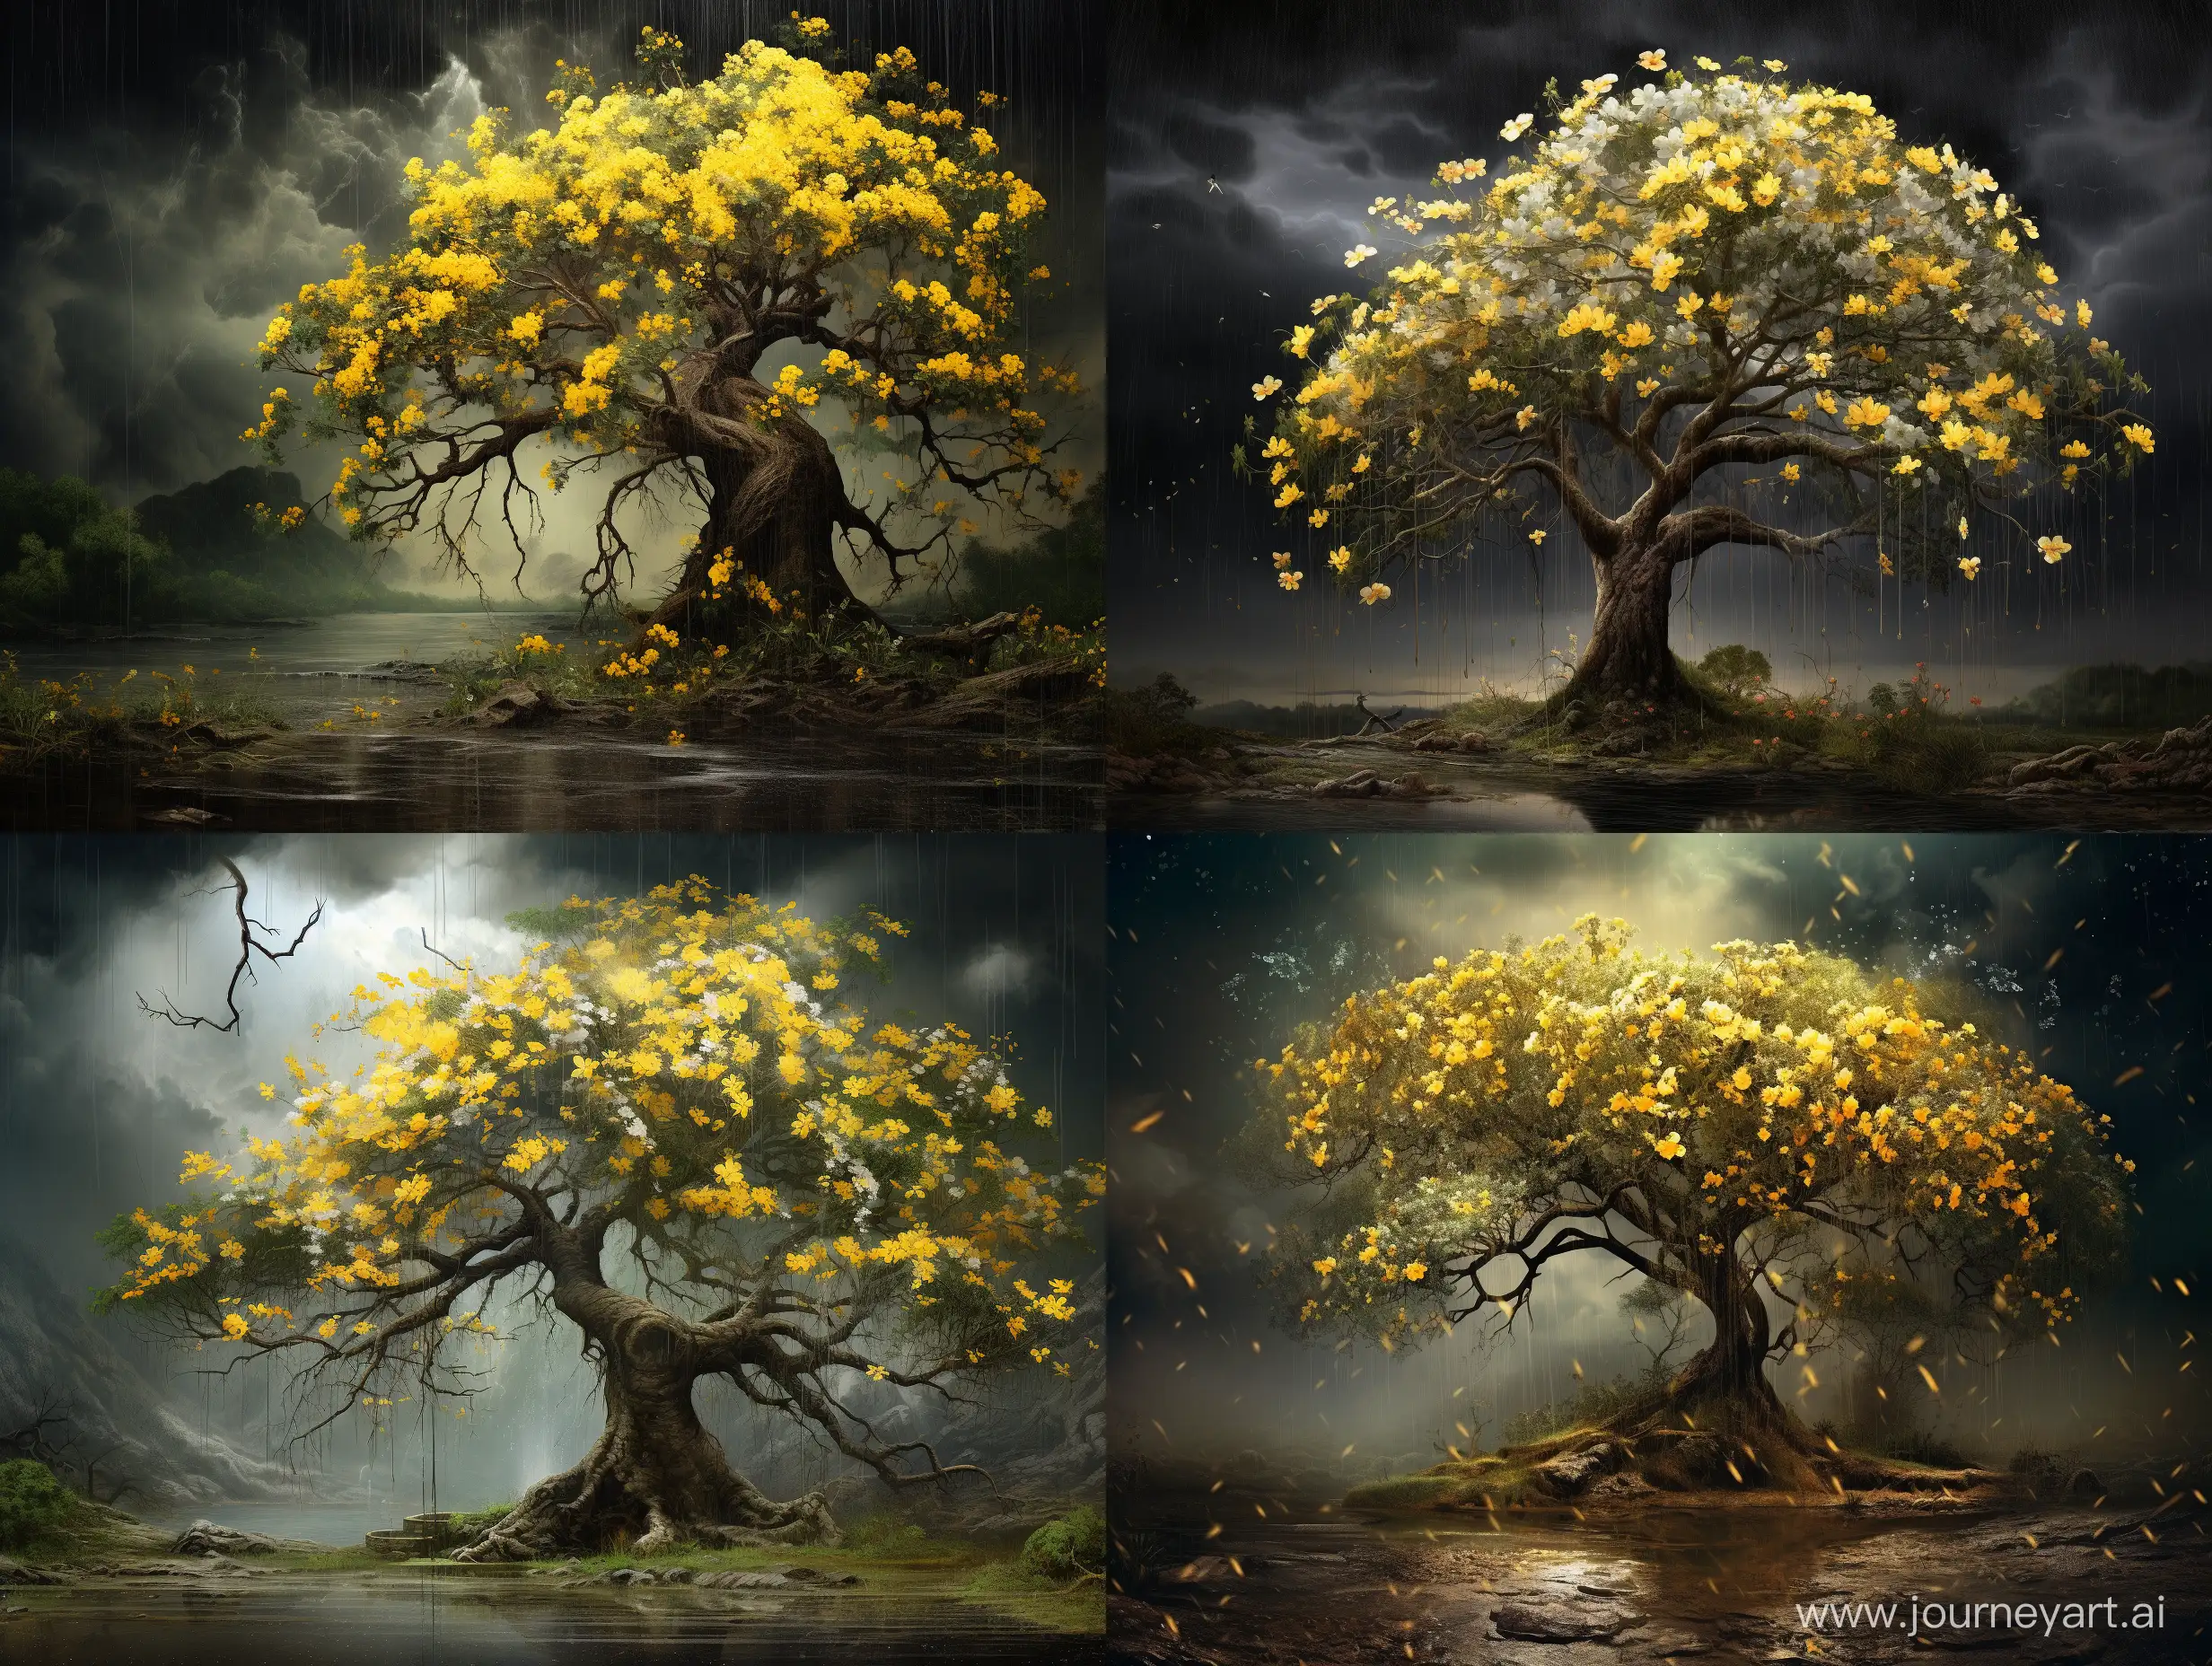 The image features a tree with a large number of yellow flowers blooming on it. The tree is surrounded by a downpour of rain, which is falling on the flowers and the tree itself. The scene captures the beauty of the tree and its flowers in the midst of the rainfall.